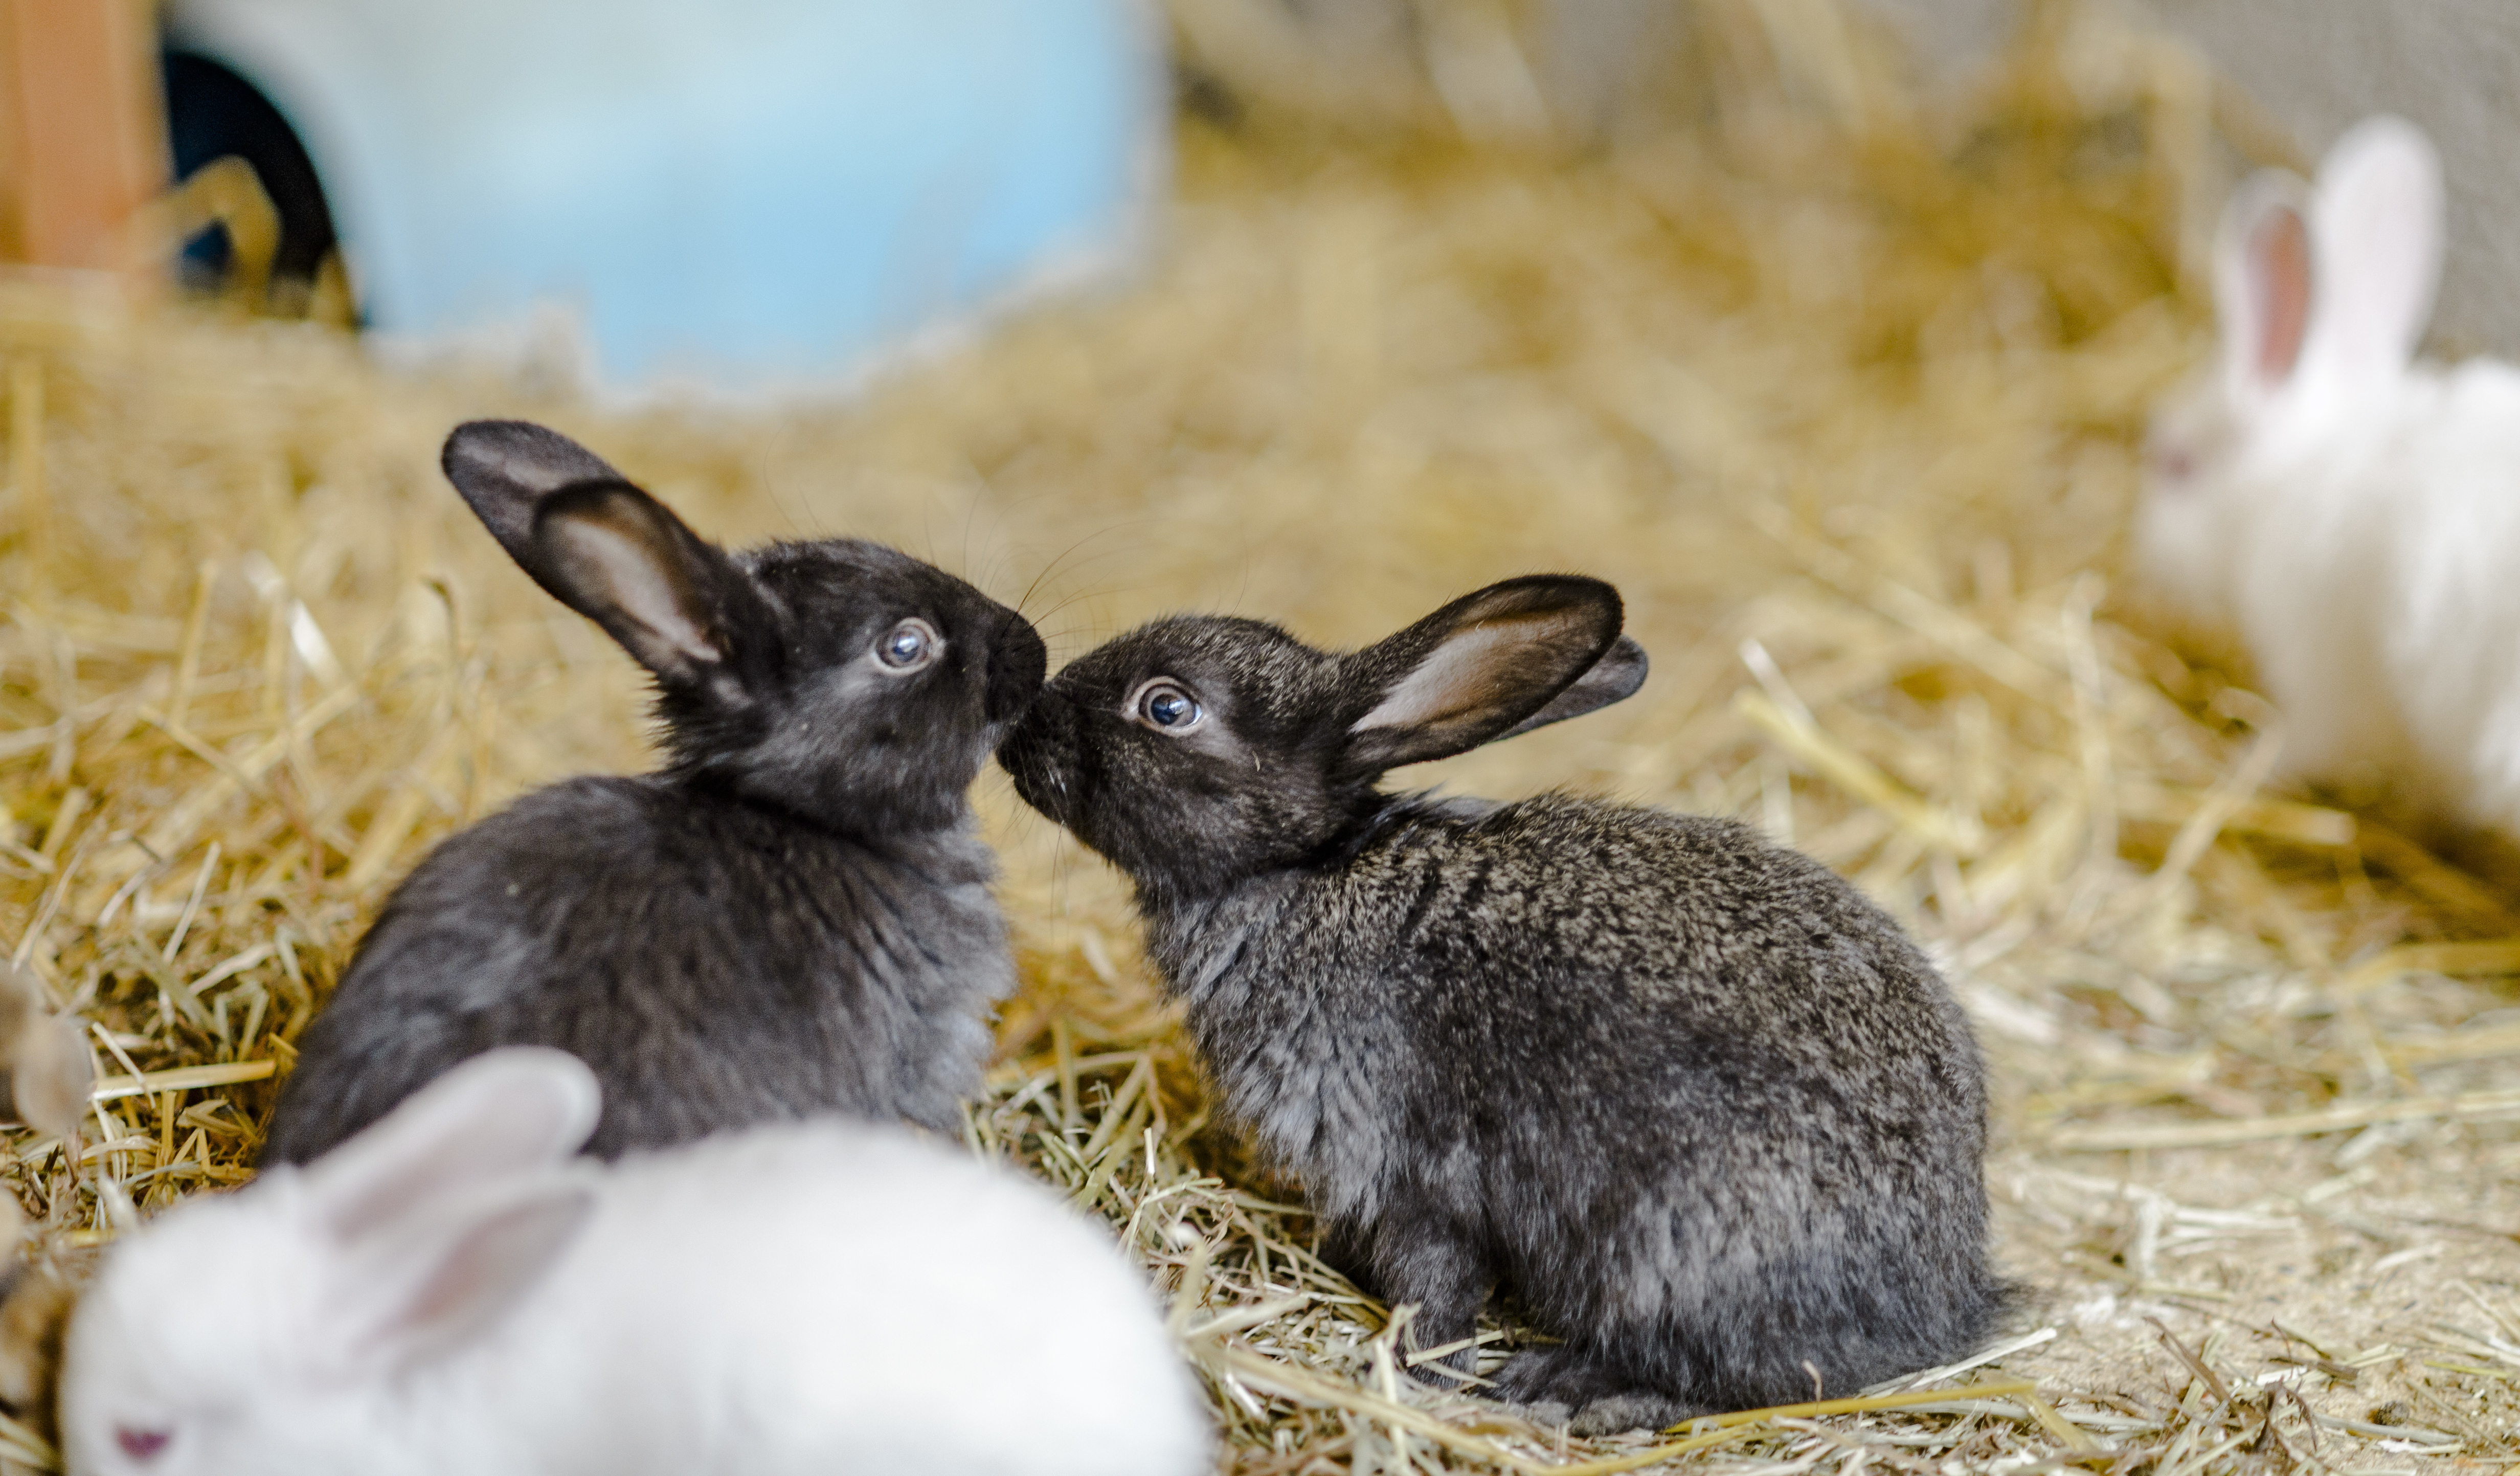 15 things you probably didn't know about rabbits | Blue Cross